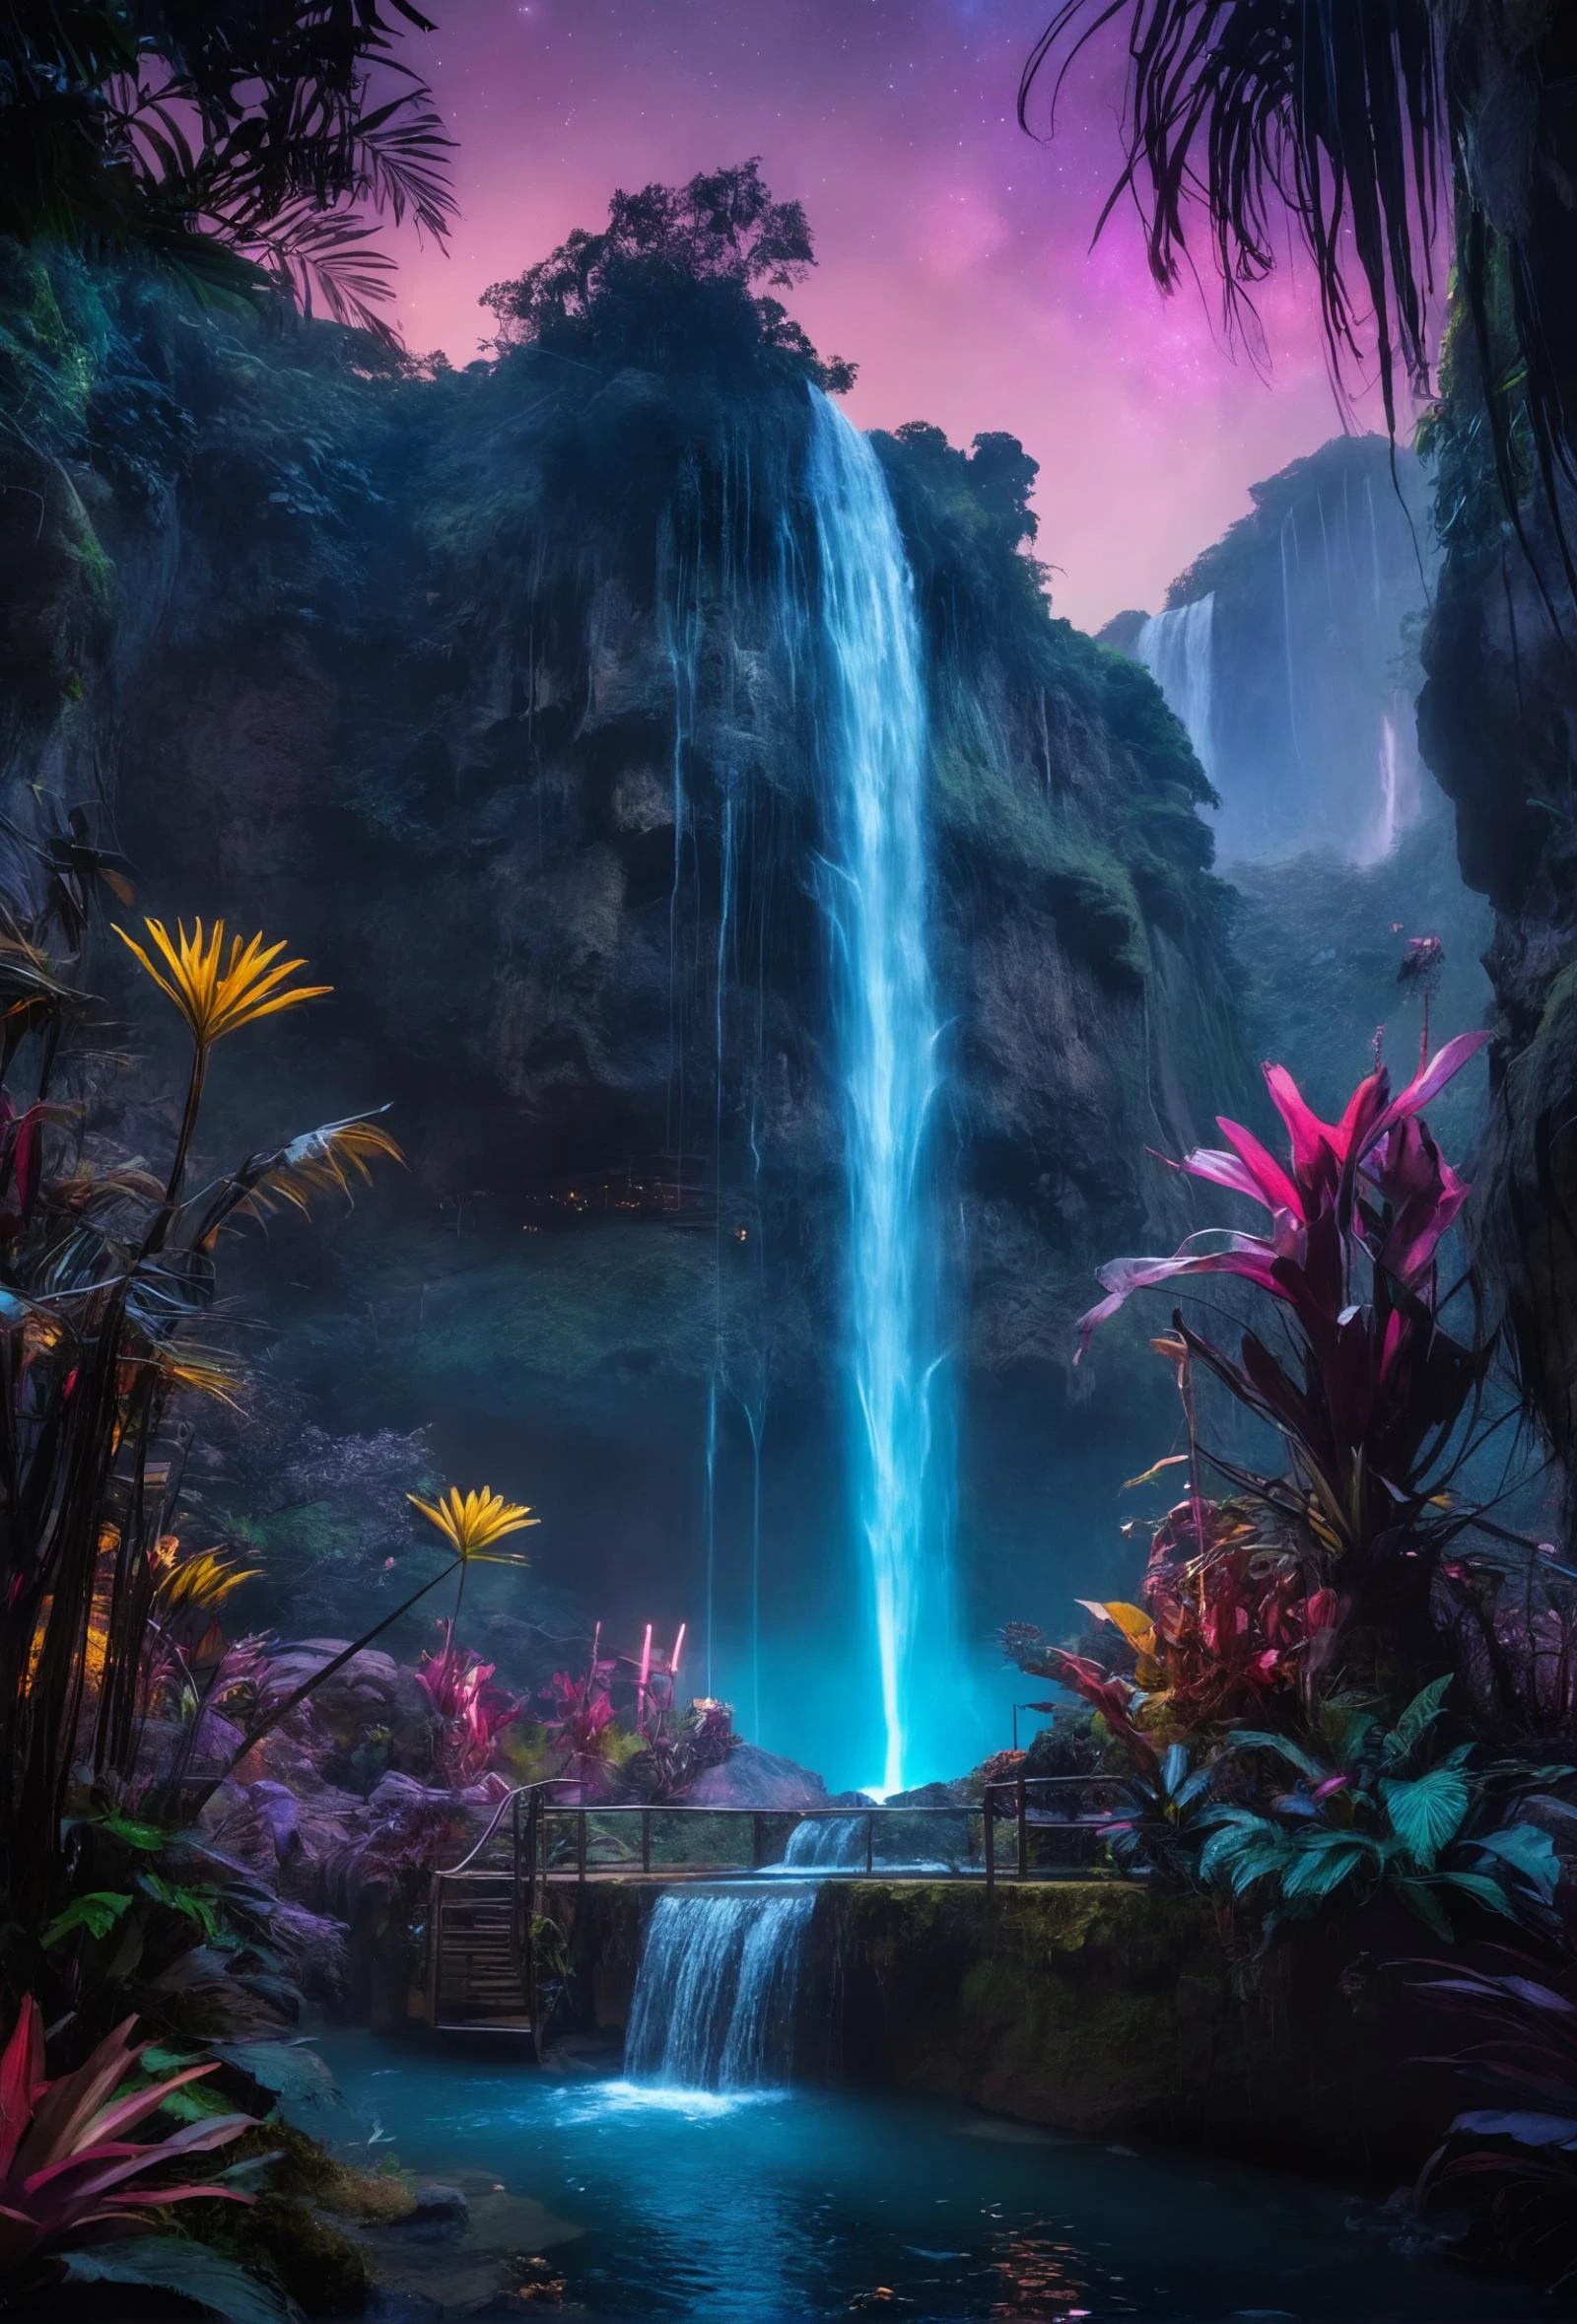 cinematic still a world where nature and technology converge in harmony. In this futuristic neon jungle, waterfalls cascade like liquid light, exotic plants pulse with bioluminescent life, and floating platforms offer a sanctuary among the stars. Under the twilight sky, the landscape is alive with vibrant blues and purples, a testament to the planetâs mysterious beauty and the advanced civilizations that respect it.â . emotional, harmonious, vignette, 4k epic detailed, shot on kodak, 35mm photo, sharp focus, high budget, cinemascope, moody, epic, gorgeous, film grain, grainy, a world where nature and technology converge in harmony. In this futuristic neon jungle, waterfalls cascade like liquid light, exotic plants pulse with bioluminescent life, and floating platforms offer a sanctuary among the stars. Under the twilight sky, the landscape is alive with vibrant blues and purples, a testament to the planetâs mysterious beauty and the advanced civilizations that respect it.â, cozy, complimentary colors, romantic, perfect composition, adventurous, cinematic, rich deep color, beautiful detailed intricate stunning great classic contemporary fine detail, ambient dramatic breathtaking professional full composed, best, epic, spectacular, unique, brilliant, artistic, pure, very inspirational, cute background, inspiring, magical atmosphere, creative, positive, lovely, marvelous, elegant